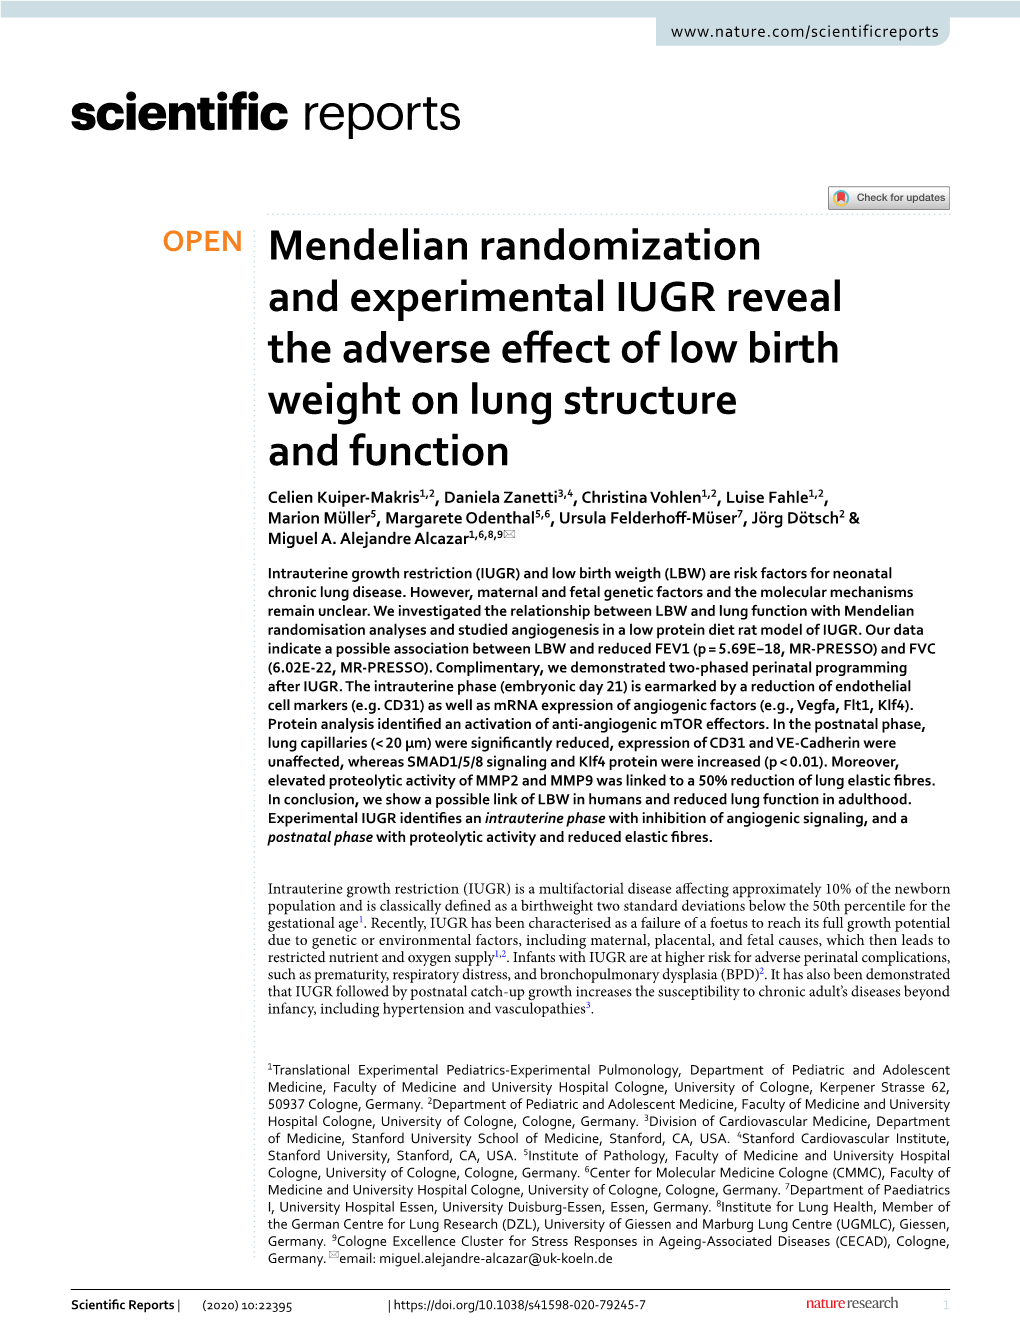 Mendelian Randomization and Experimental IUGR Reveal the Adverse Effect of Low Birth Weight on Lung Structure and Function